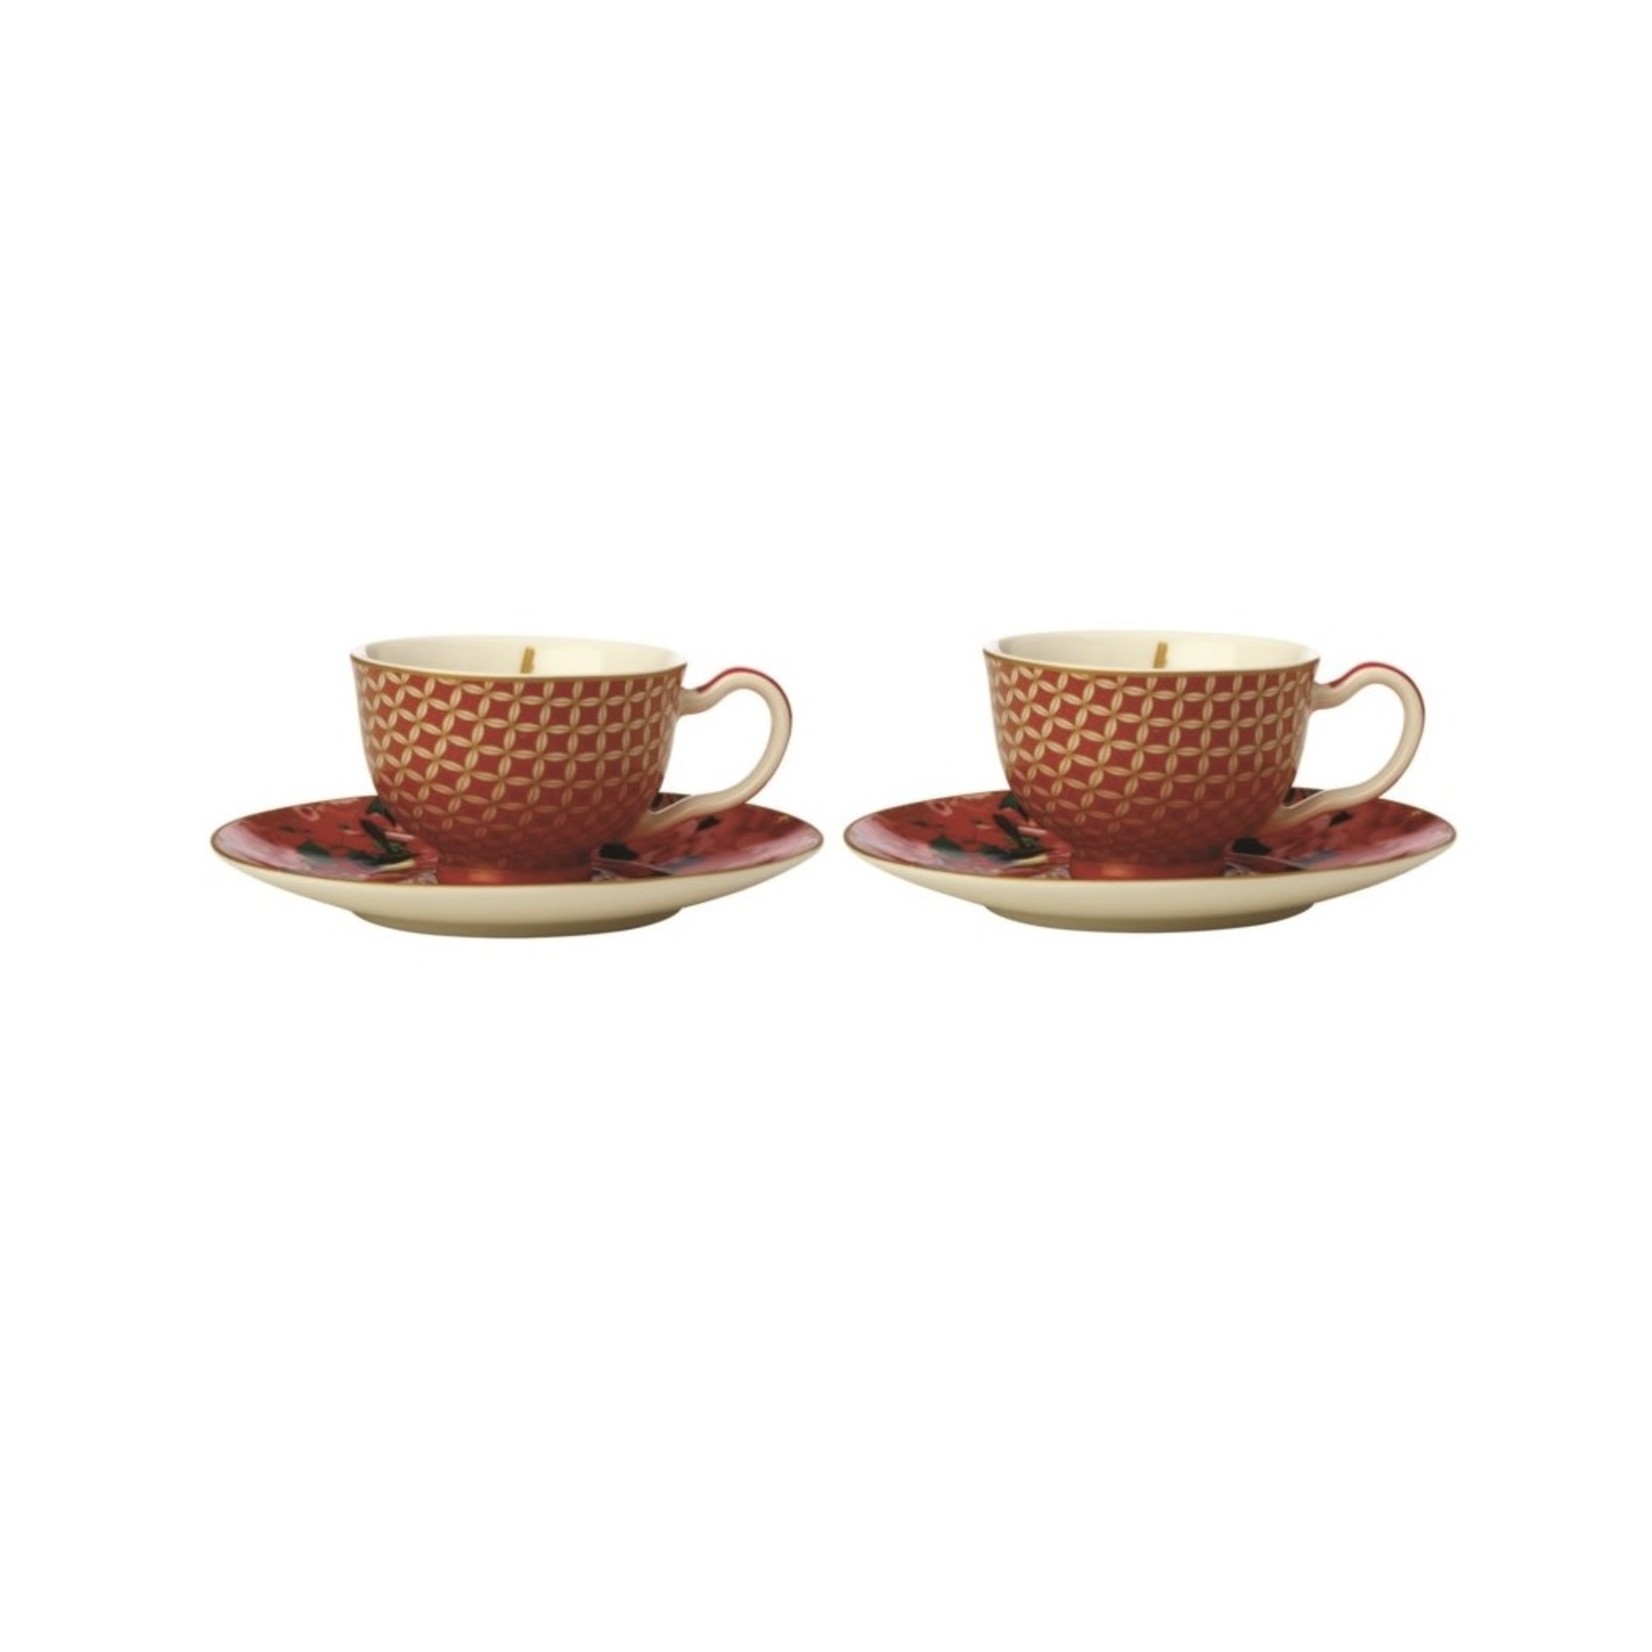 MAXWELL WILLIAMS MAXWELL WILLIAMS Demi Cup & Saucer - Silk Red ( set of 2)